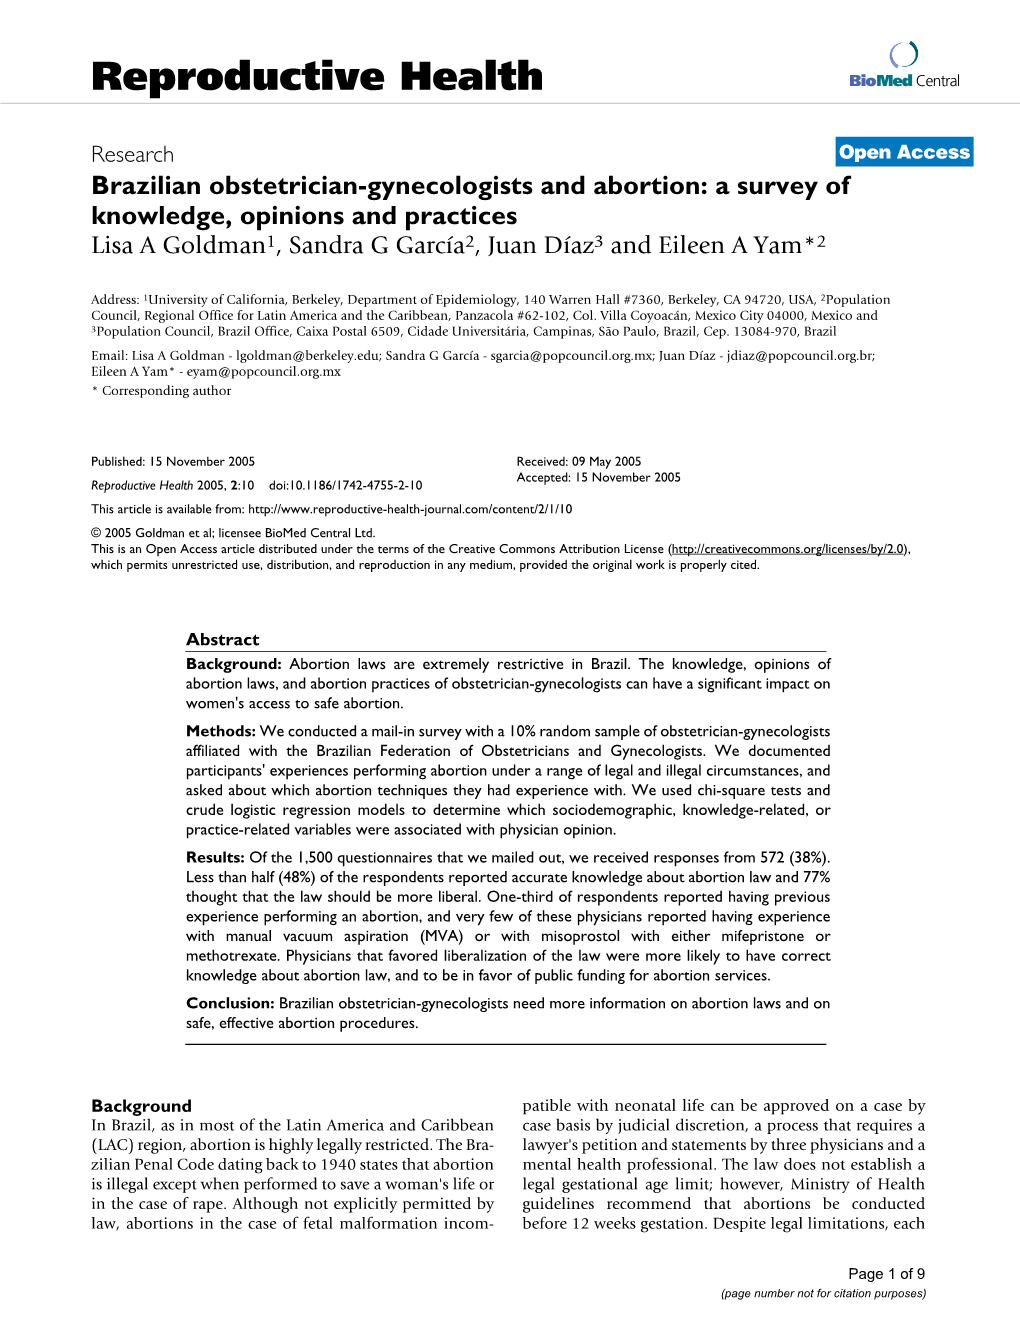 Brazilian Obstetrician-Gynecologists and Abortion: a Survey of Knowledge, Opinions and Practices Lisa a Goldman1, Sandra G García2, Juan Díaz3 and Eileen a Yam*2